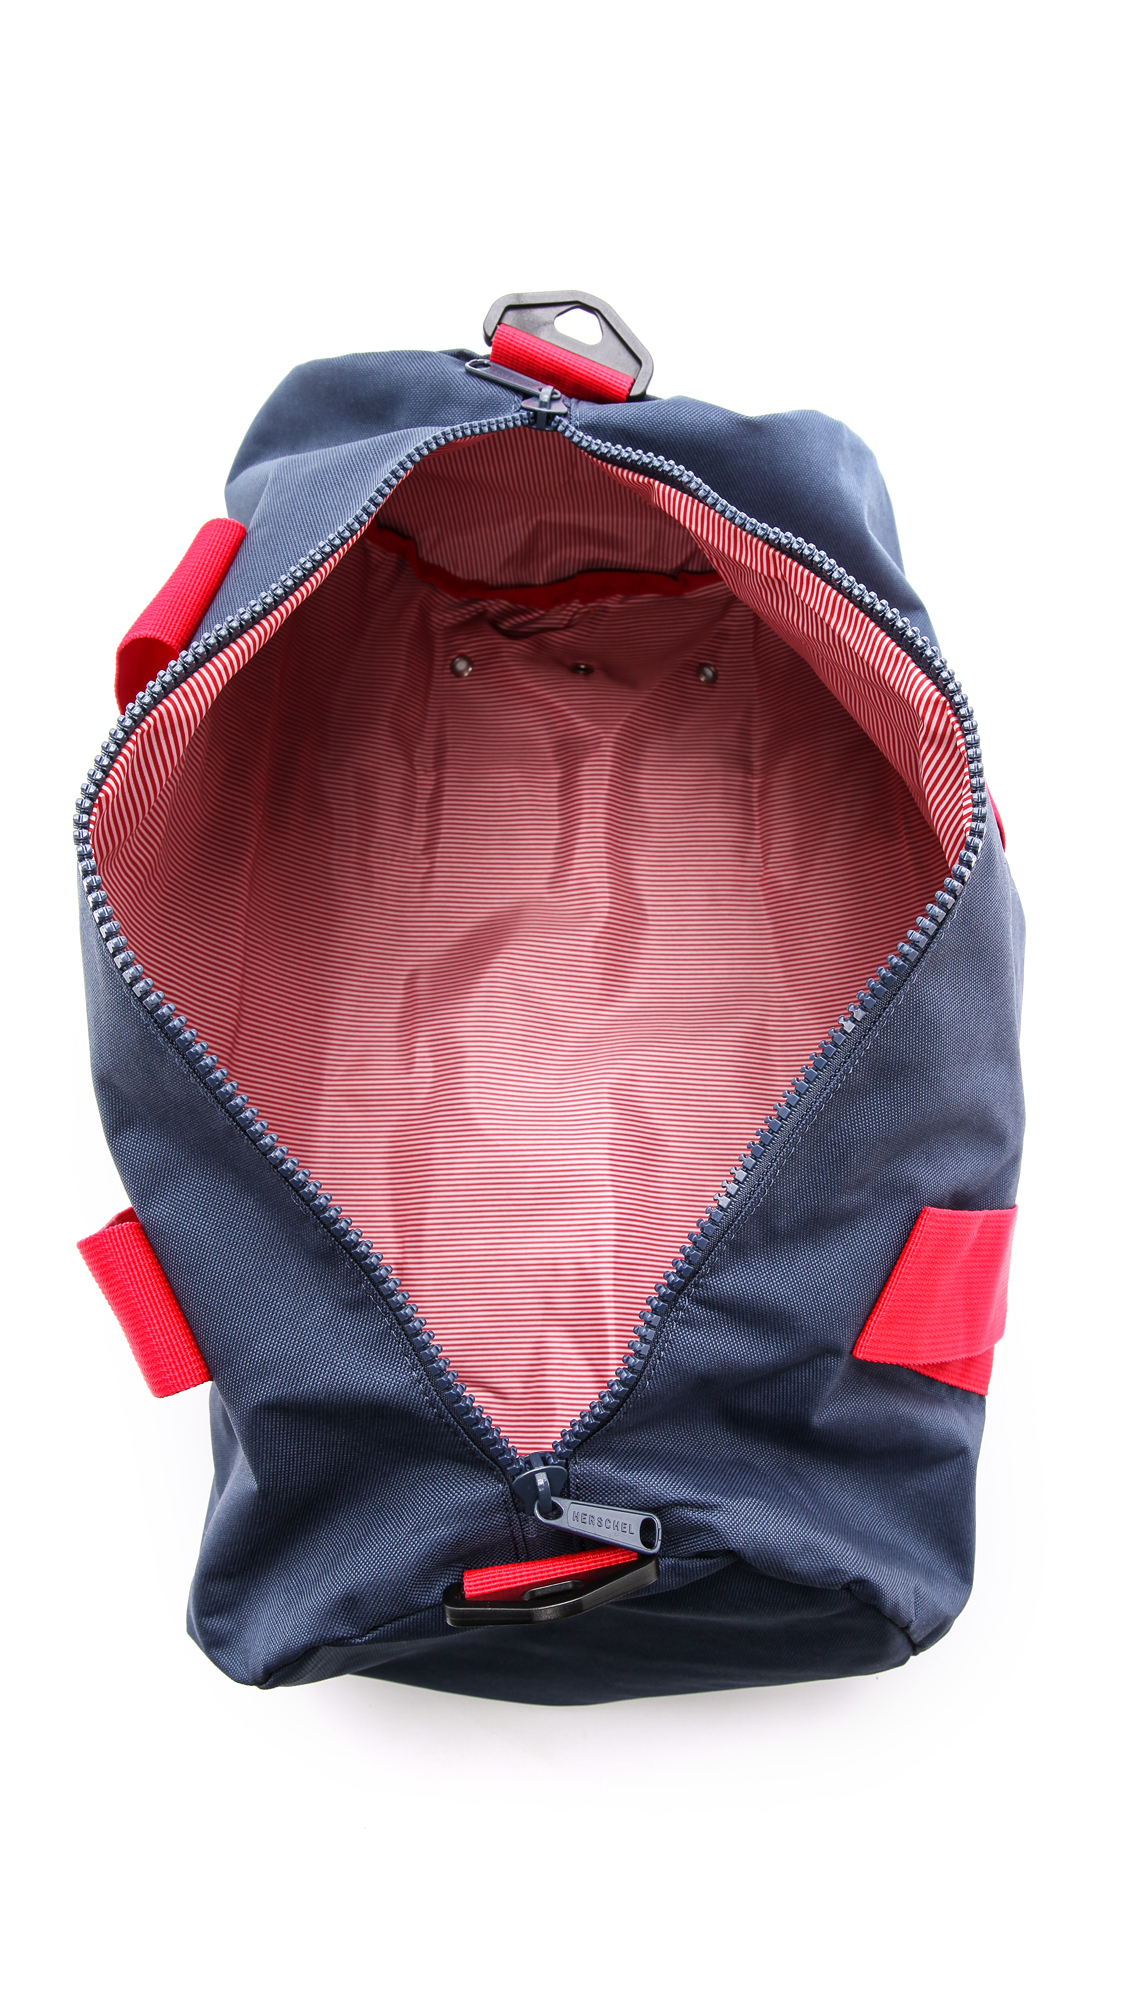 Herschel Supply Co. Strand Duffle Bag - Navy/Red in Blue - Lyst